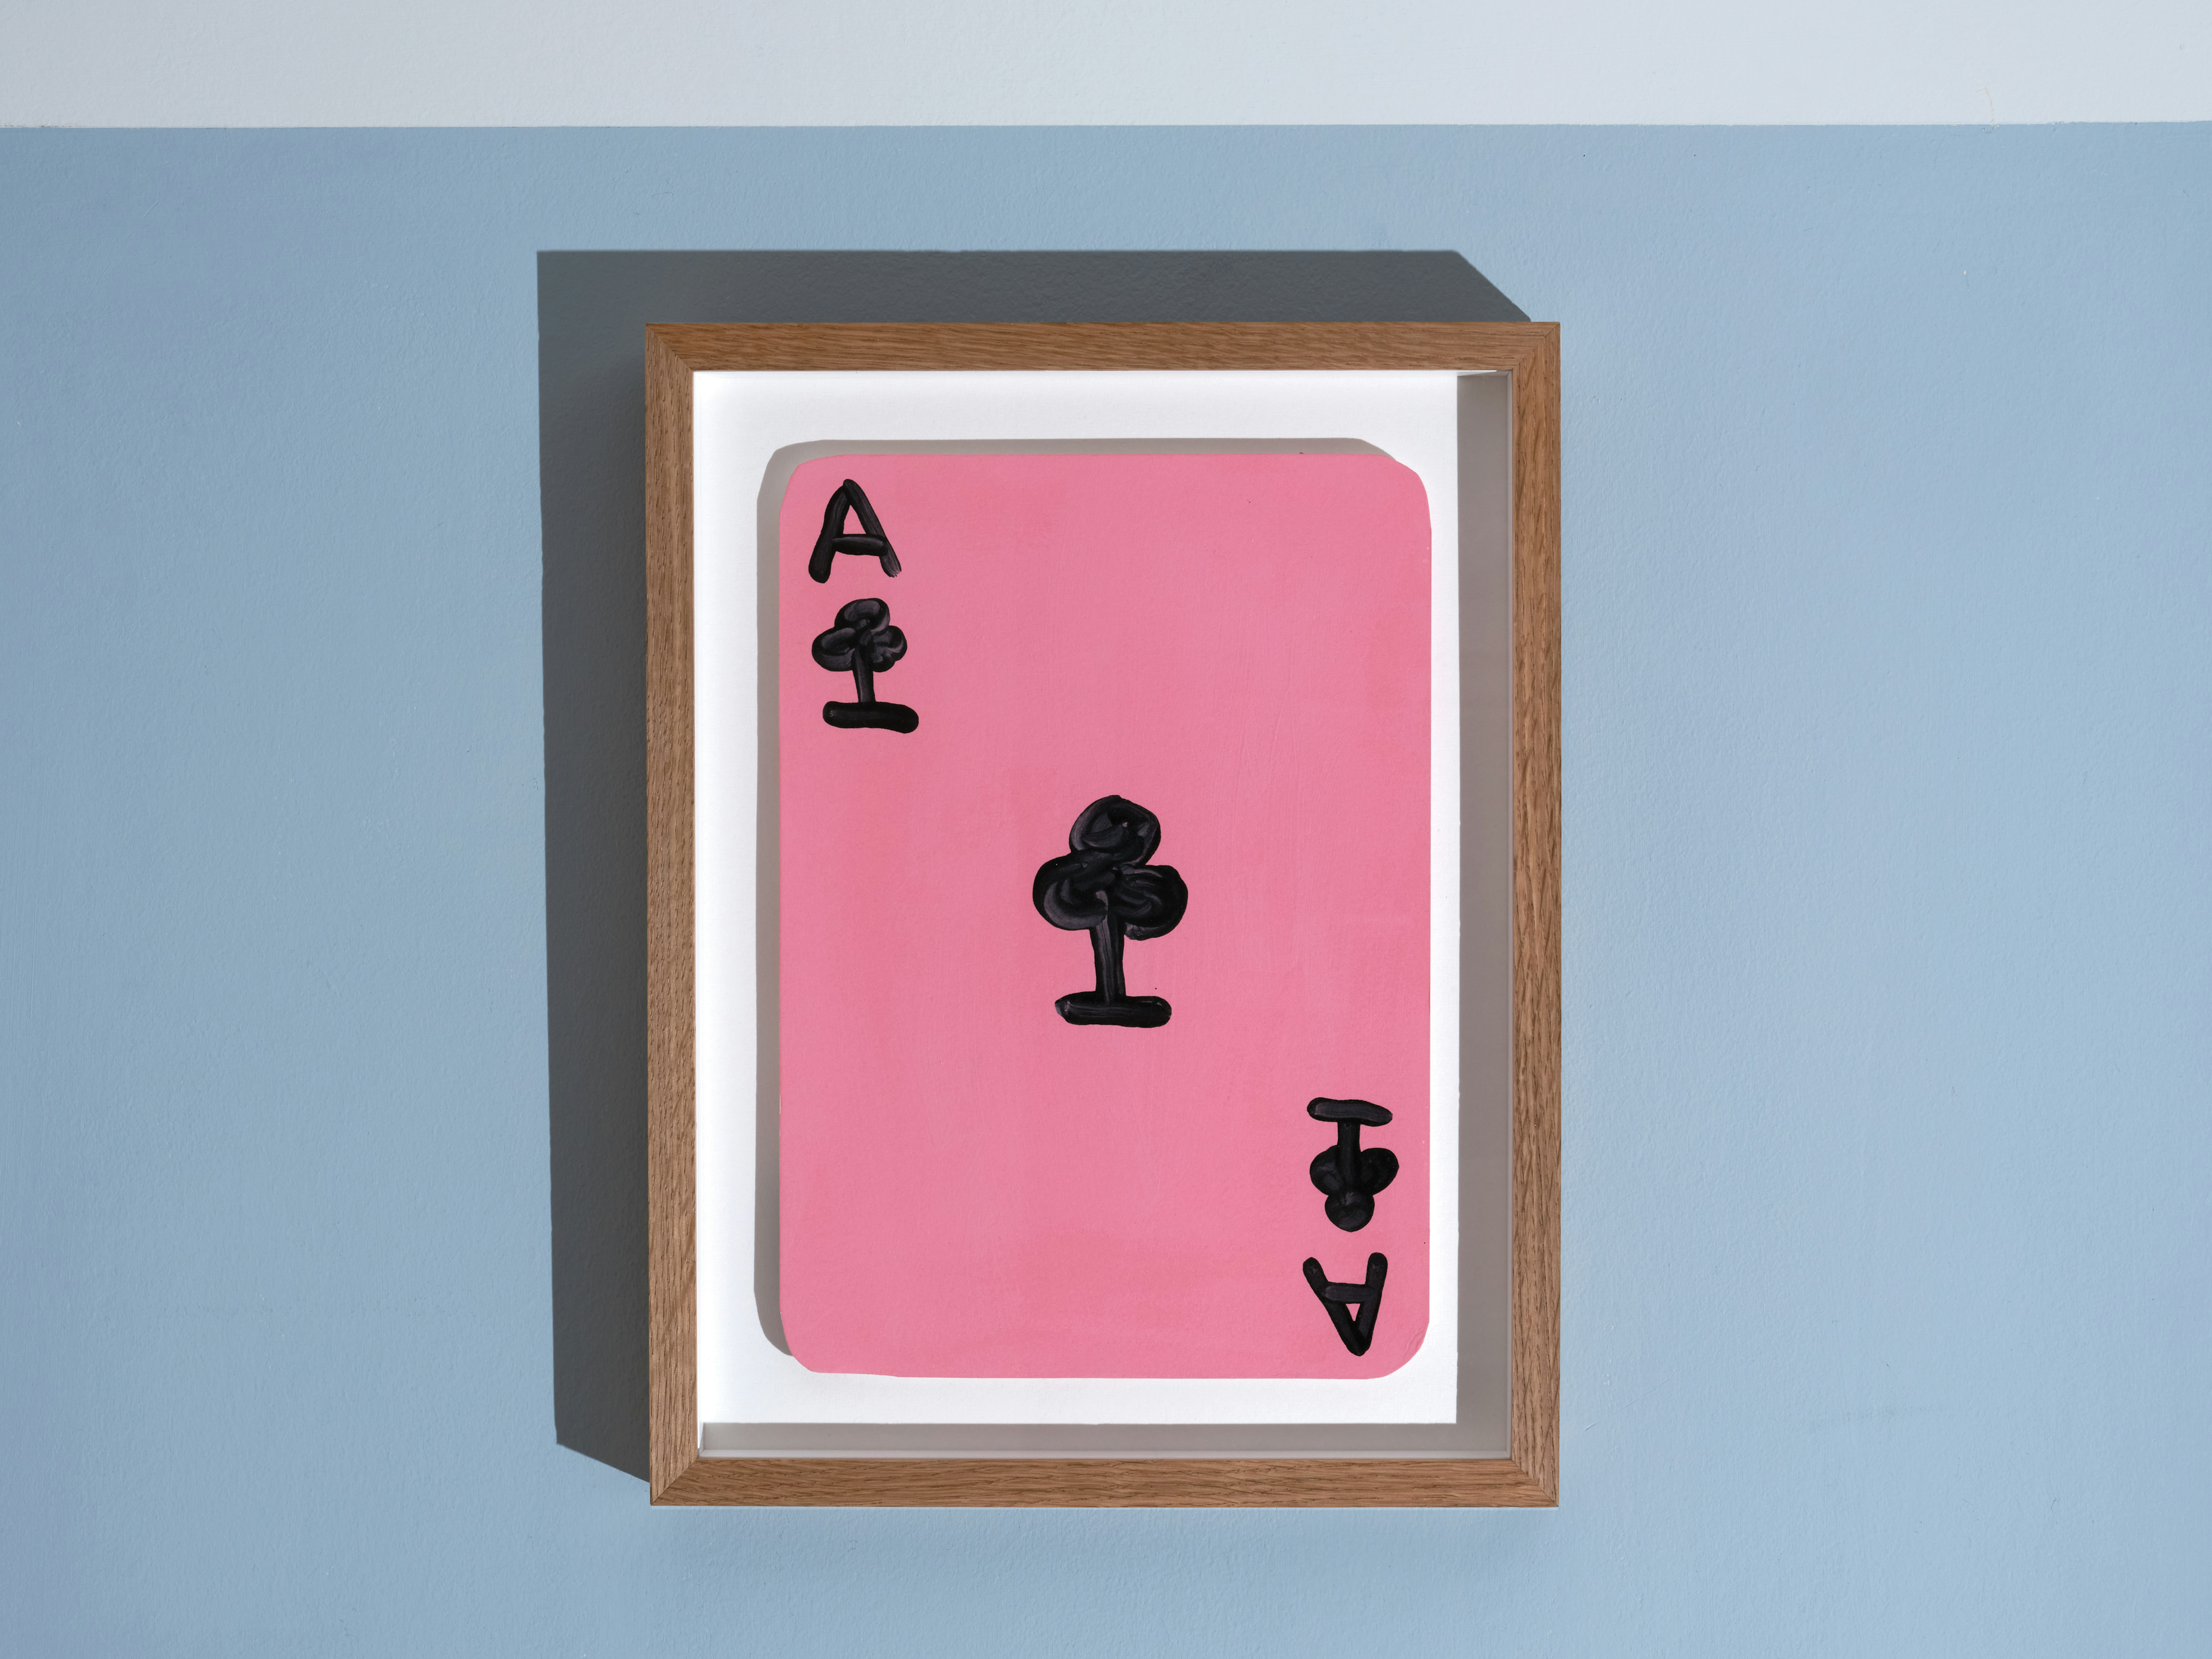 installation photo of framed paint on card by David Shrigley depicting ace of clubs card 